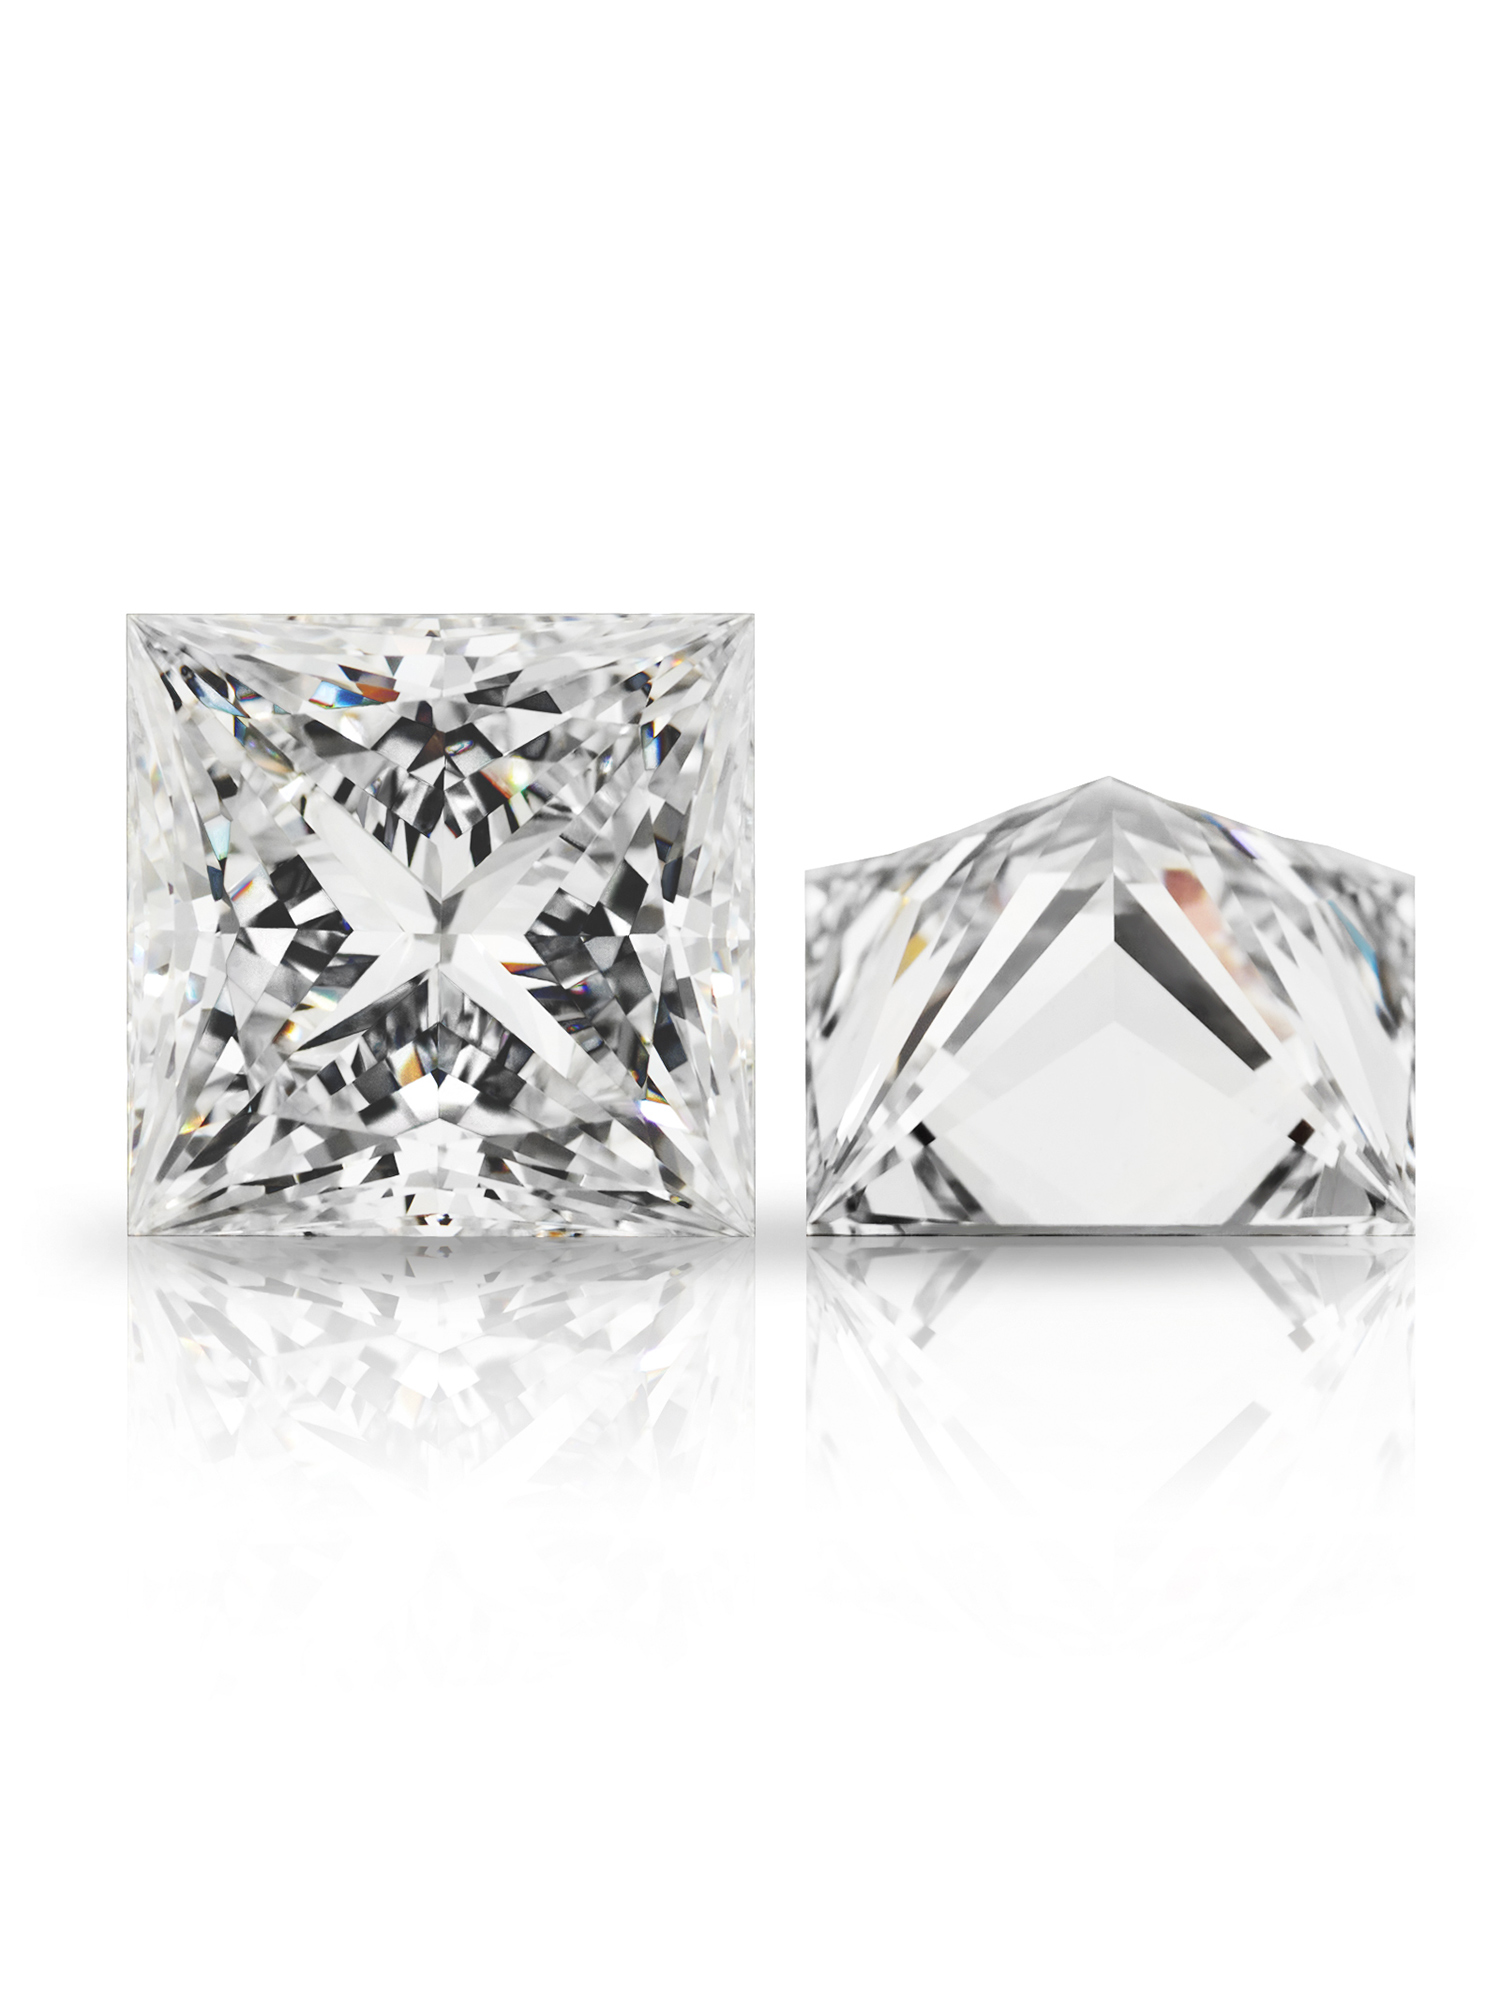 How do you choose a diamond for cultivation?